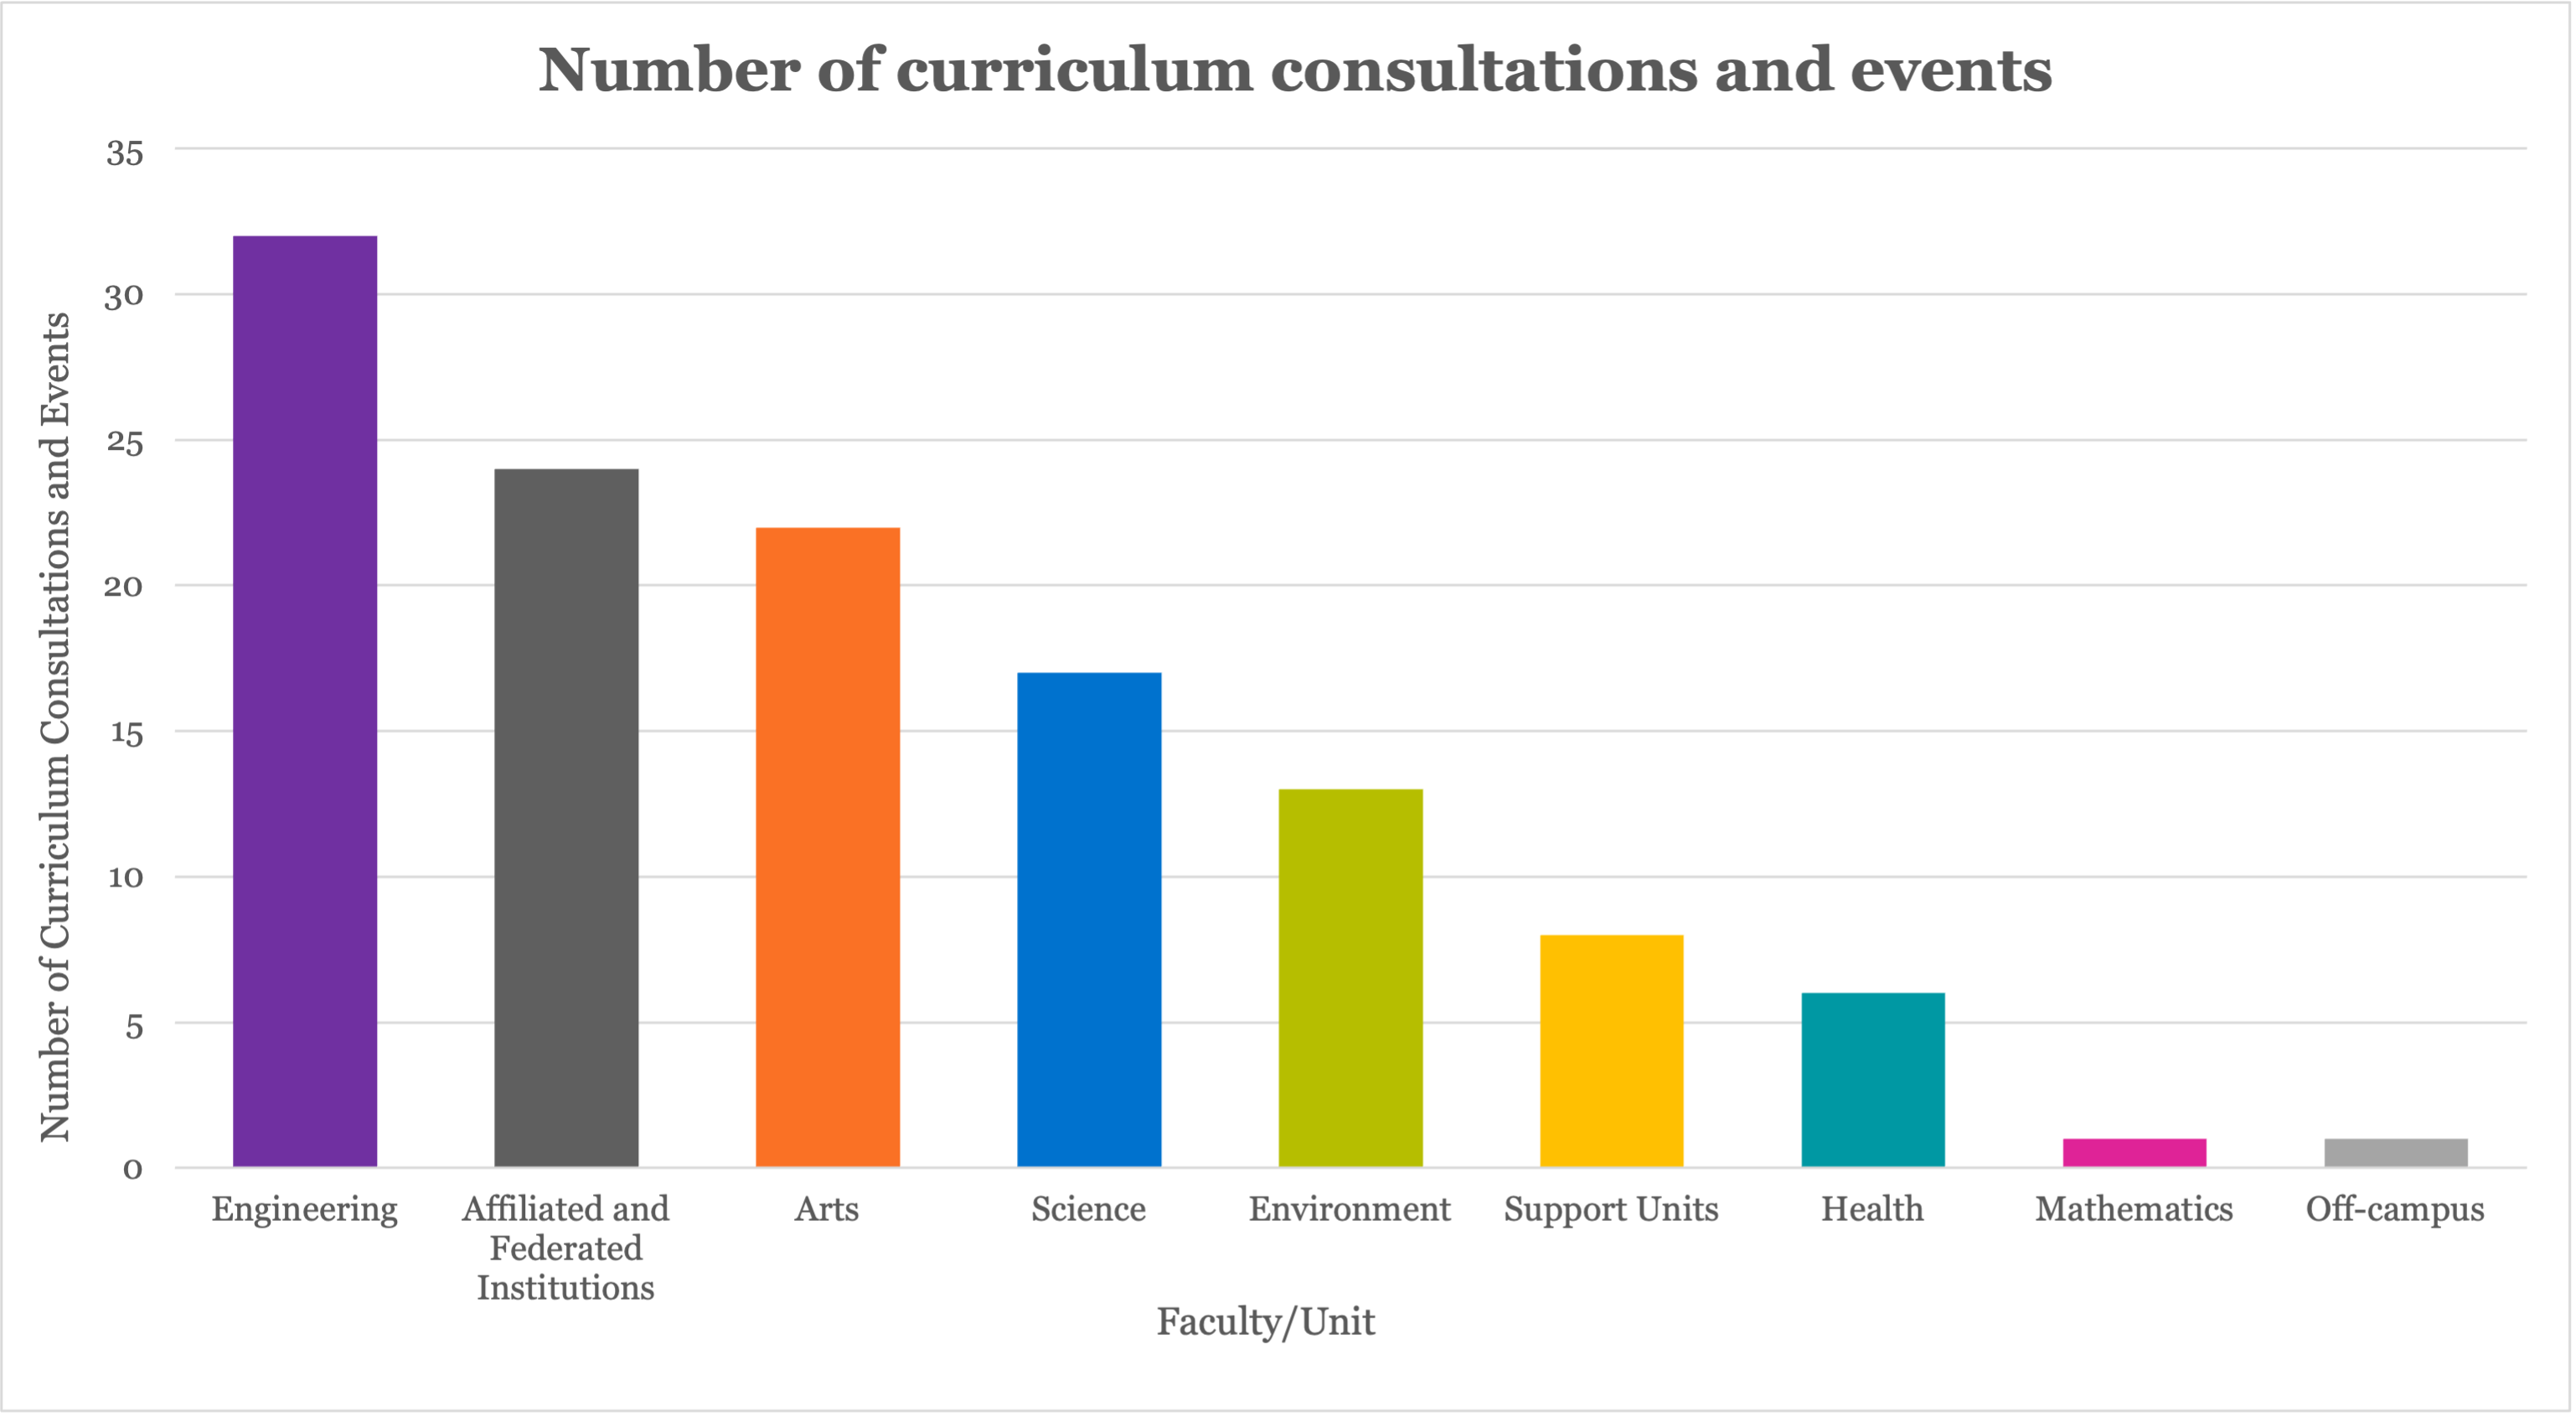 Figure 5. Vertical bar graph highlighting the number of curriculum consultations and events. Listed in order of highest to lowest number of consultations and events by Faculty and other units: Engineering – 32, Affiliated and Federated Institutions – 24, Arts – 22, Science – 17, Environment – 13, Support Units – 8, Health – 6, Mathematics – 1, Off-campus – 1. 